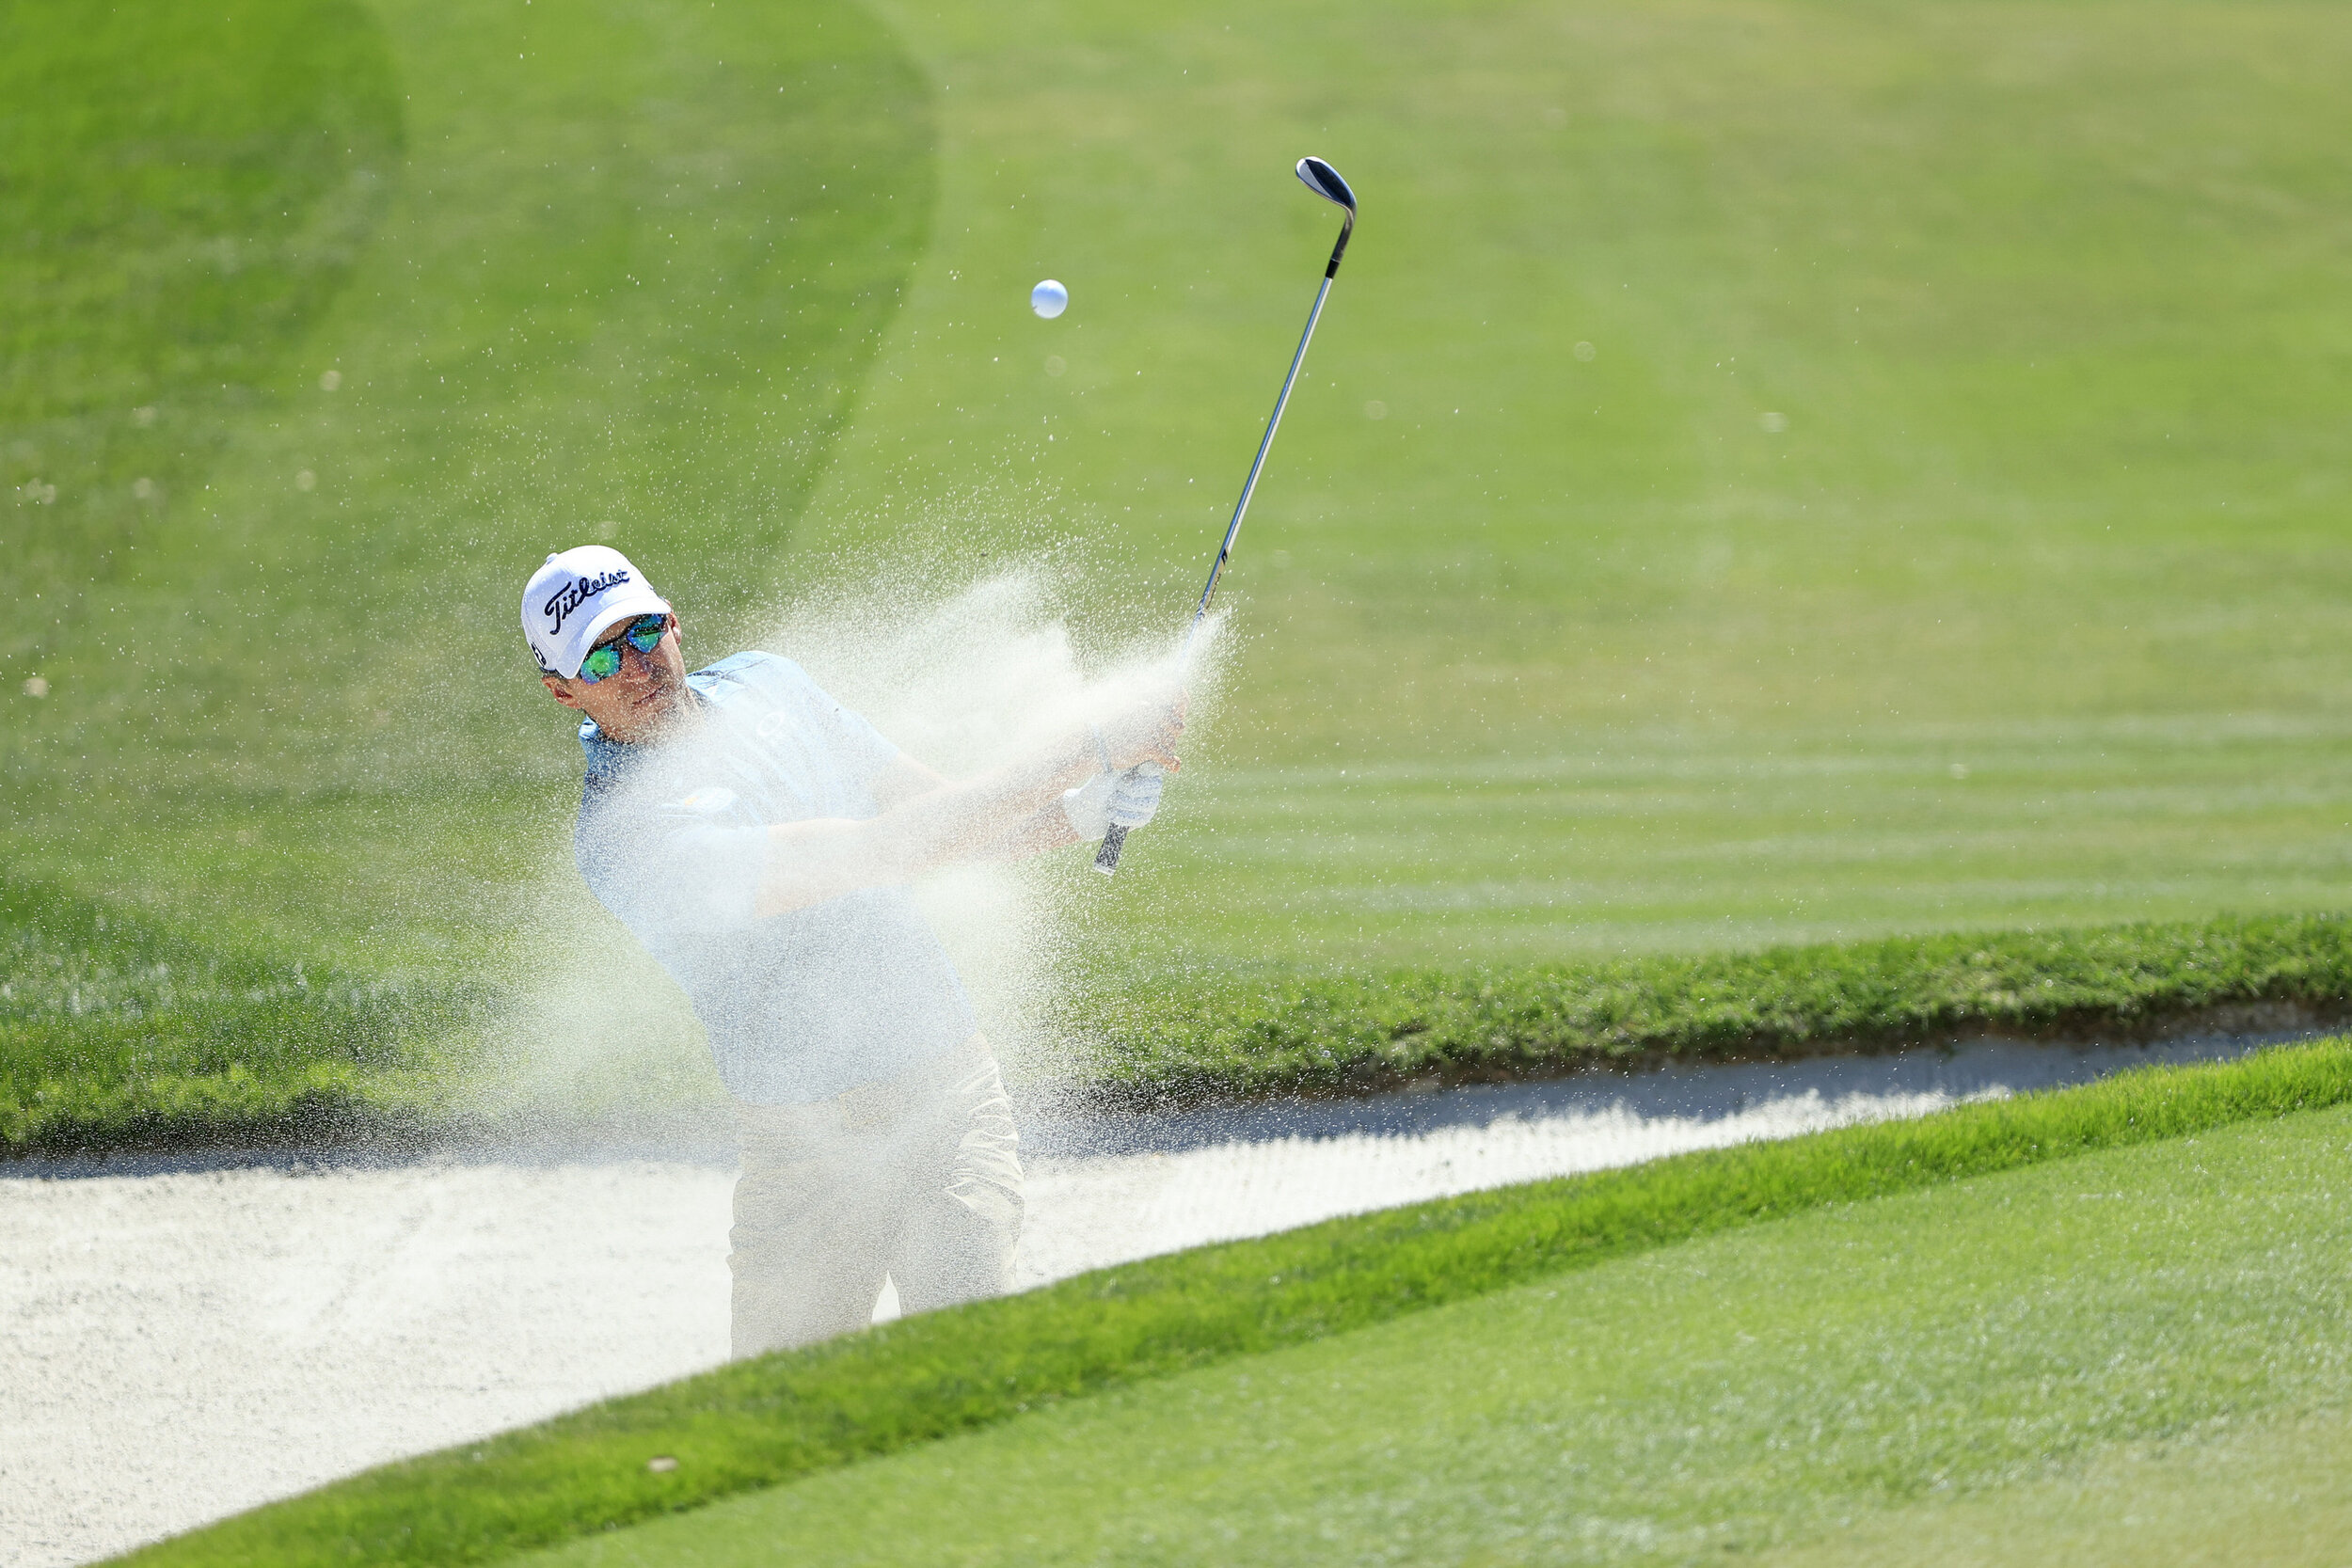  ORLANDO, FLORIDA - MARCH 07: Richy Werenski of the United States plays a shot from a bunker on the first hole during the final round of the Arnold Palmer Invitational Presented by MasterCard at the Bay Hill Club and Lodge on March 07, 2021 in Orland